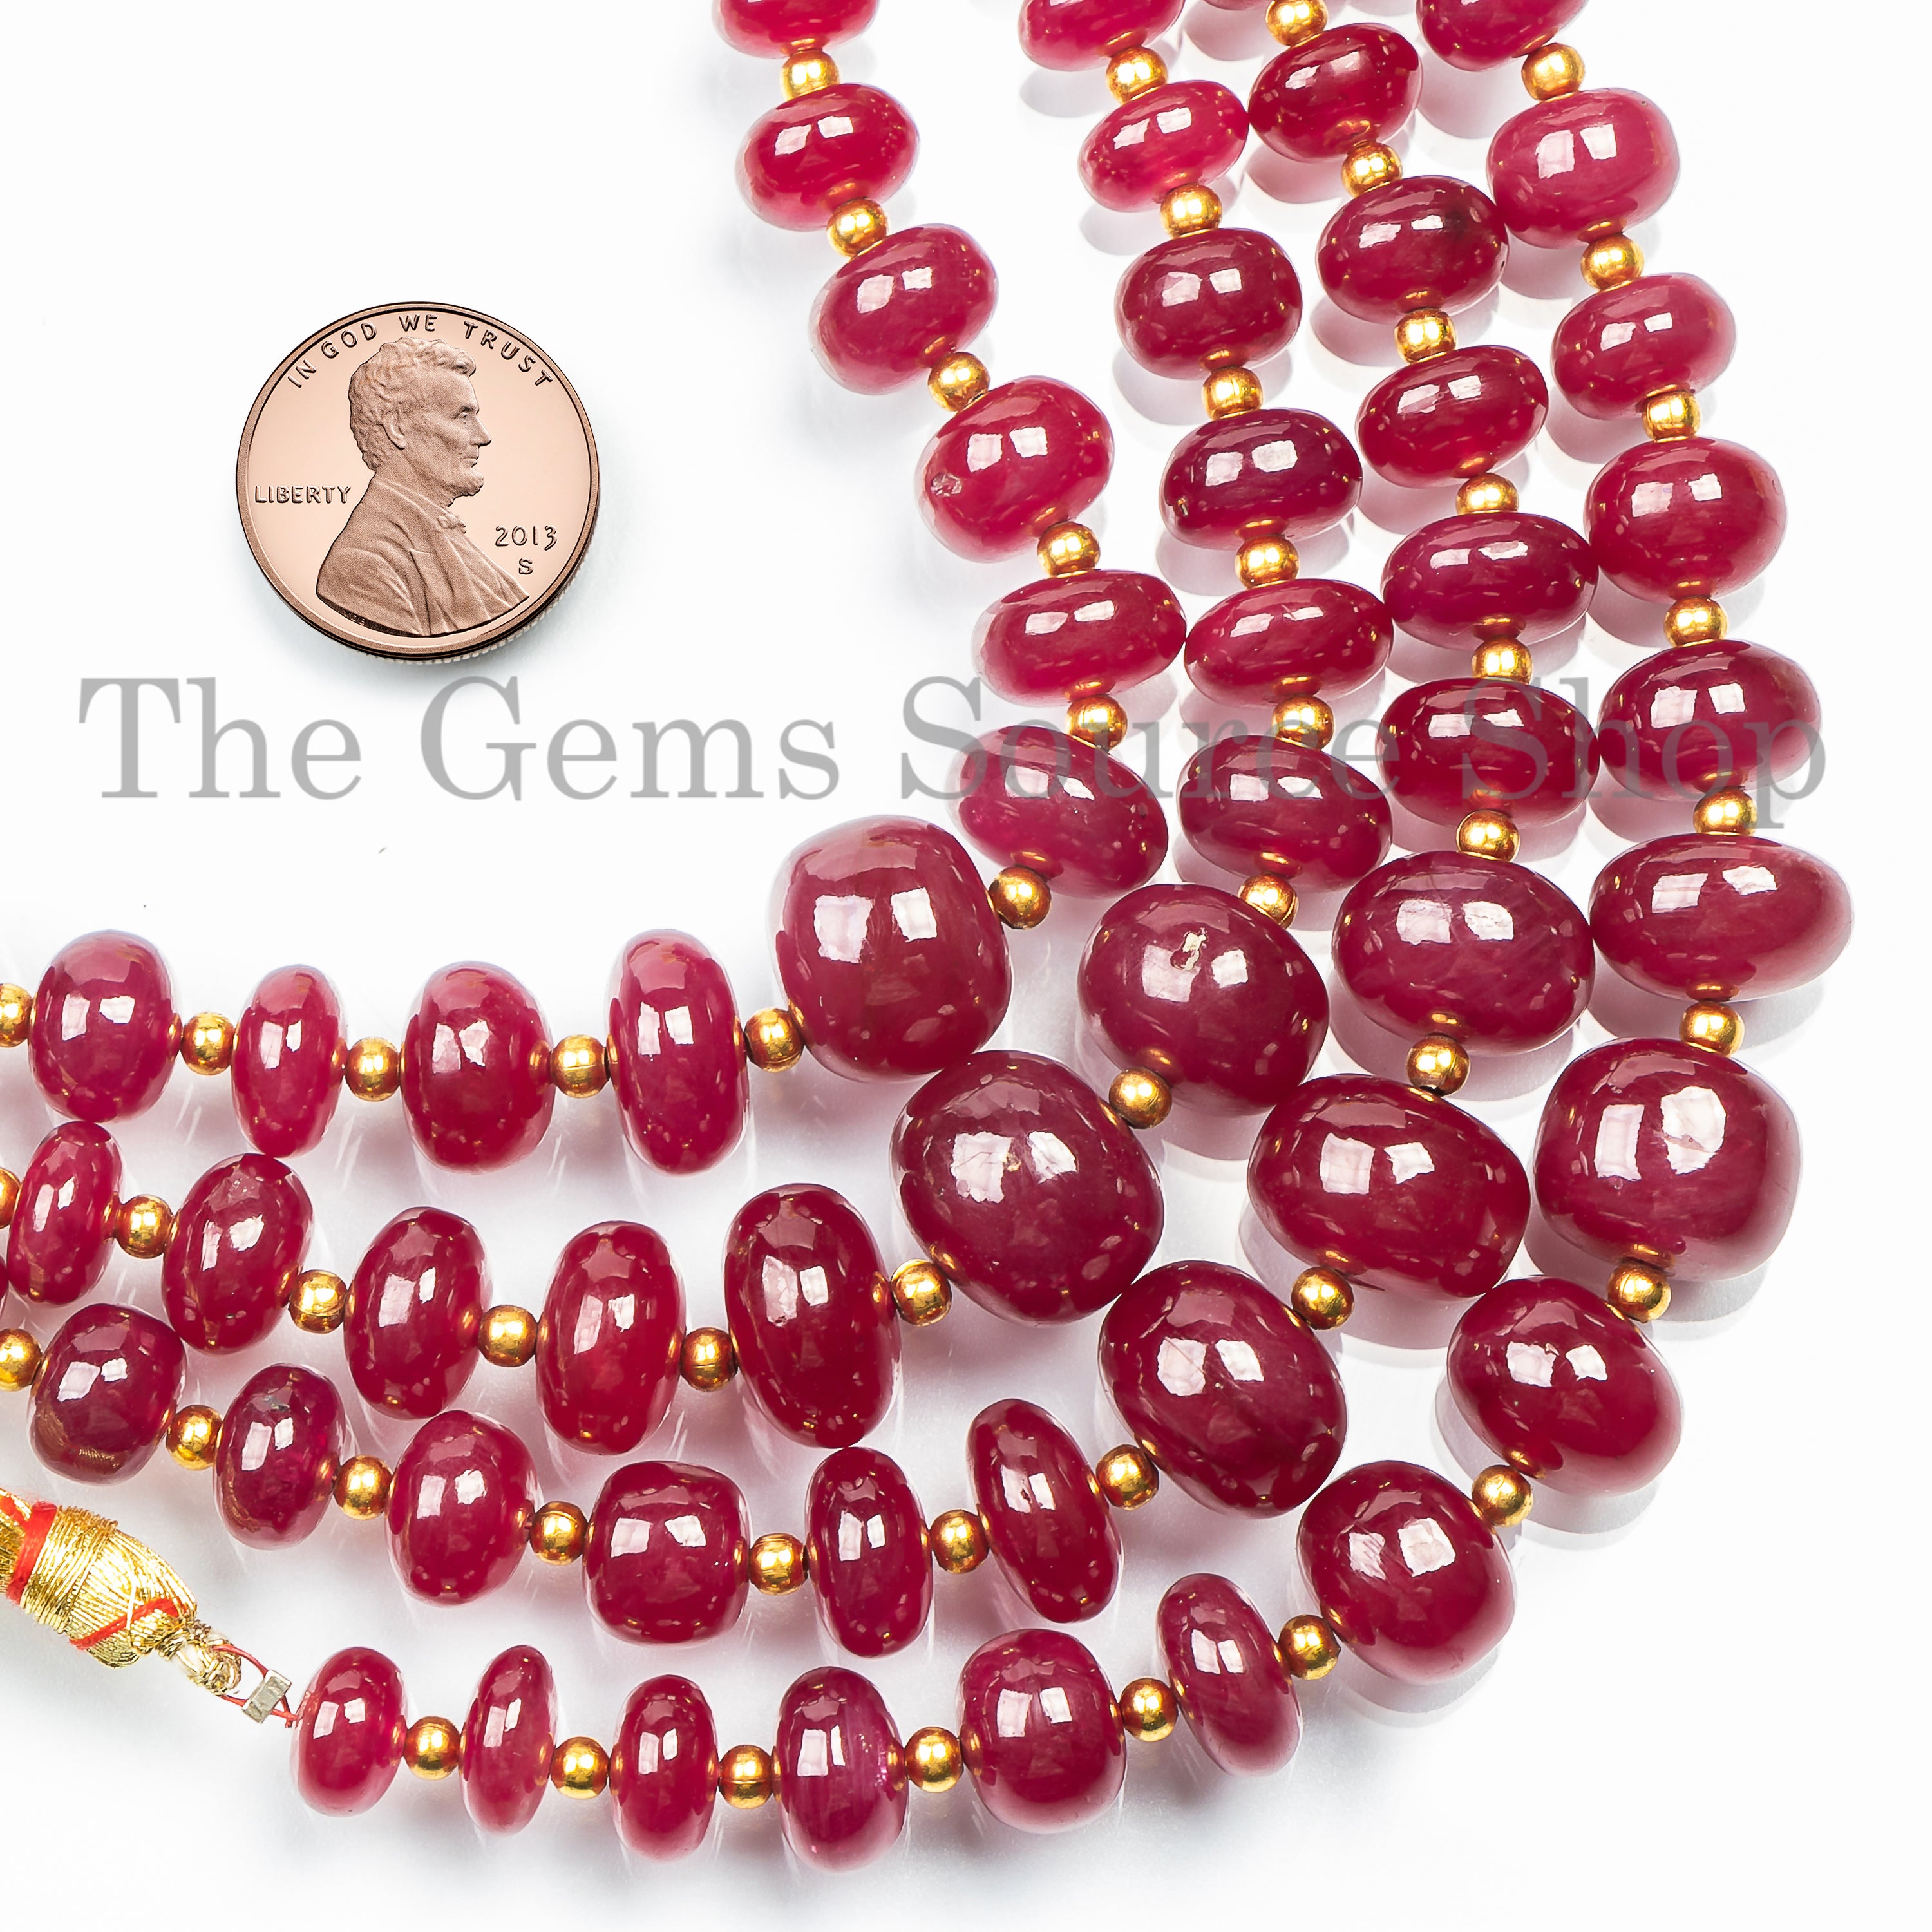 Top Quality Ruby Smooth Beads, 8-14mm Ruby Plain Rondelle Beads, Smooth Rondelle Beads, Ruby Gemstone Beads, Jewelry Making Beads